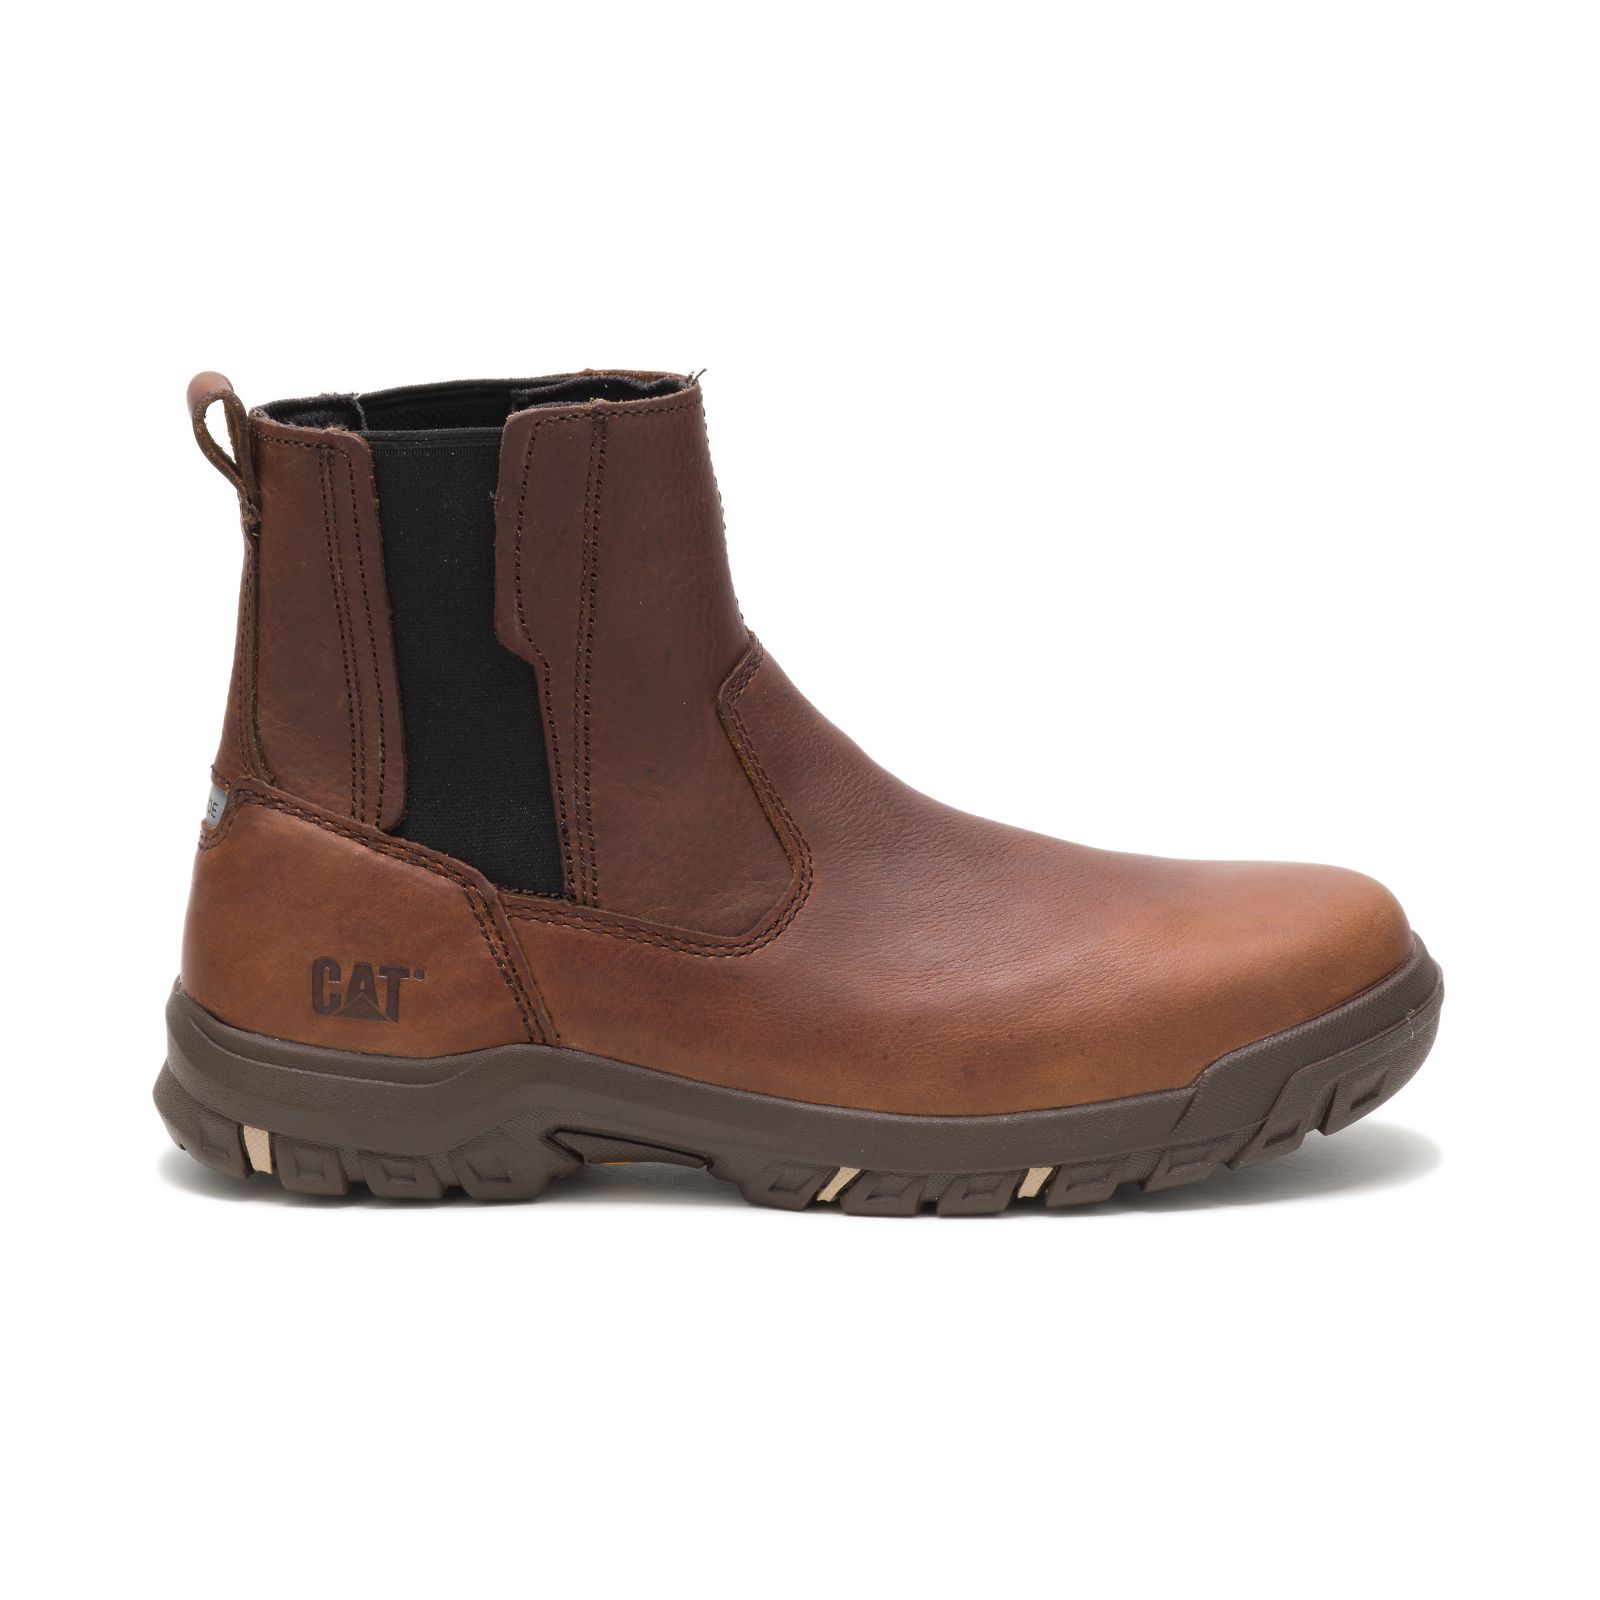 Caterpillar Boots Lahore - Caterpillar Abbey Steel Toe Womens Slip On Boots Brown (465072-WPV)